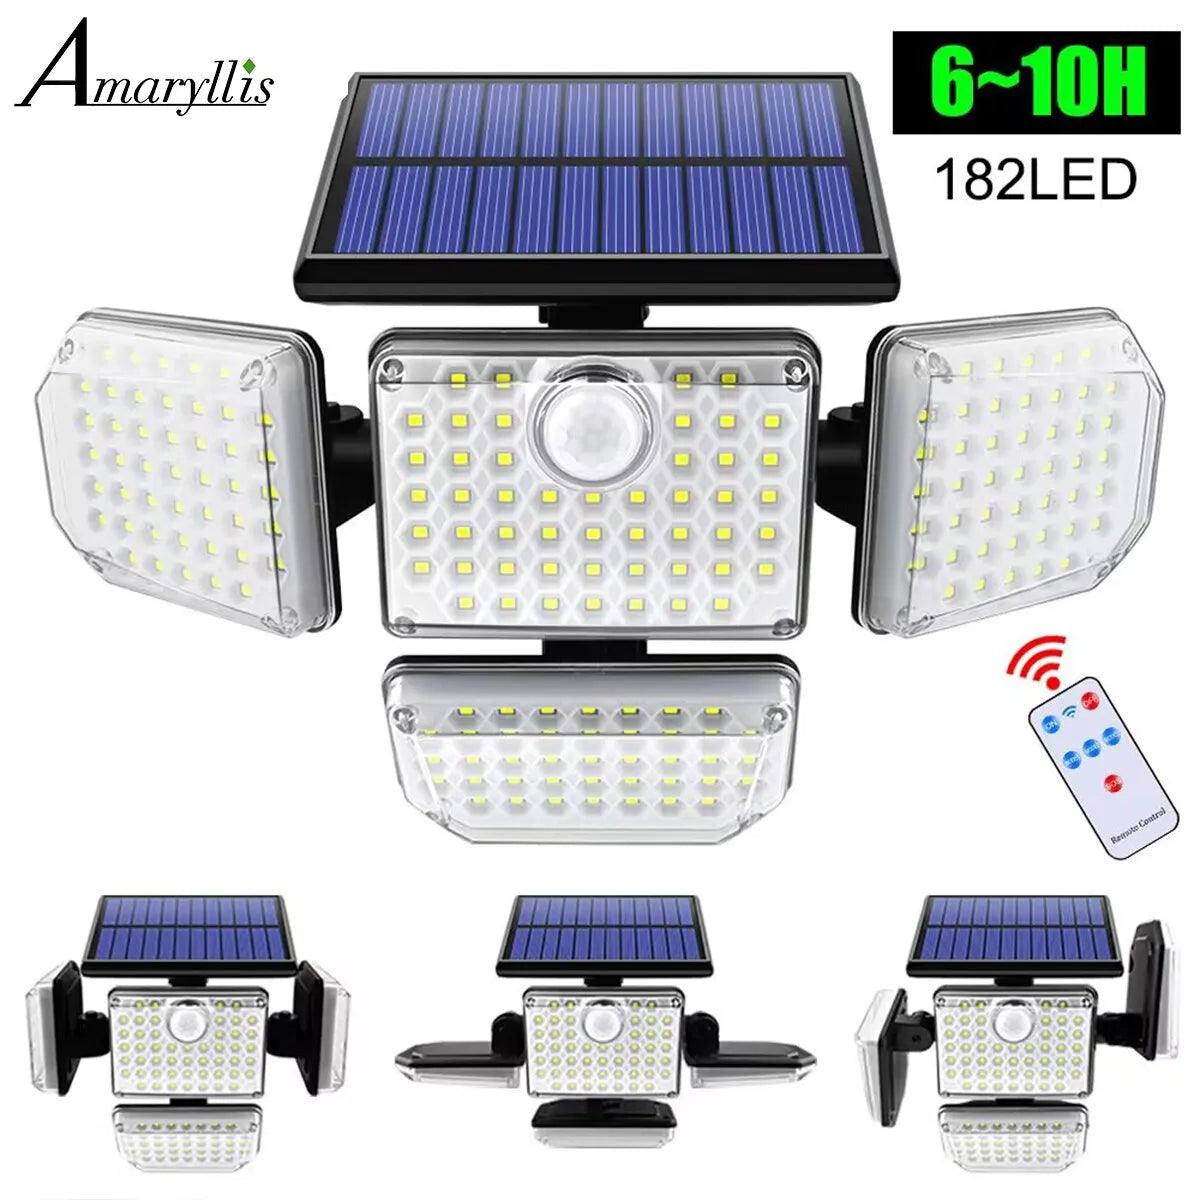 LED Solar Security Flood Light with Adjustable Lighting Head for Outdoor Spaces  ourlum.com   